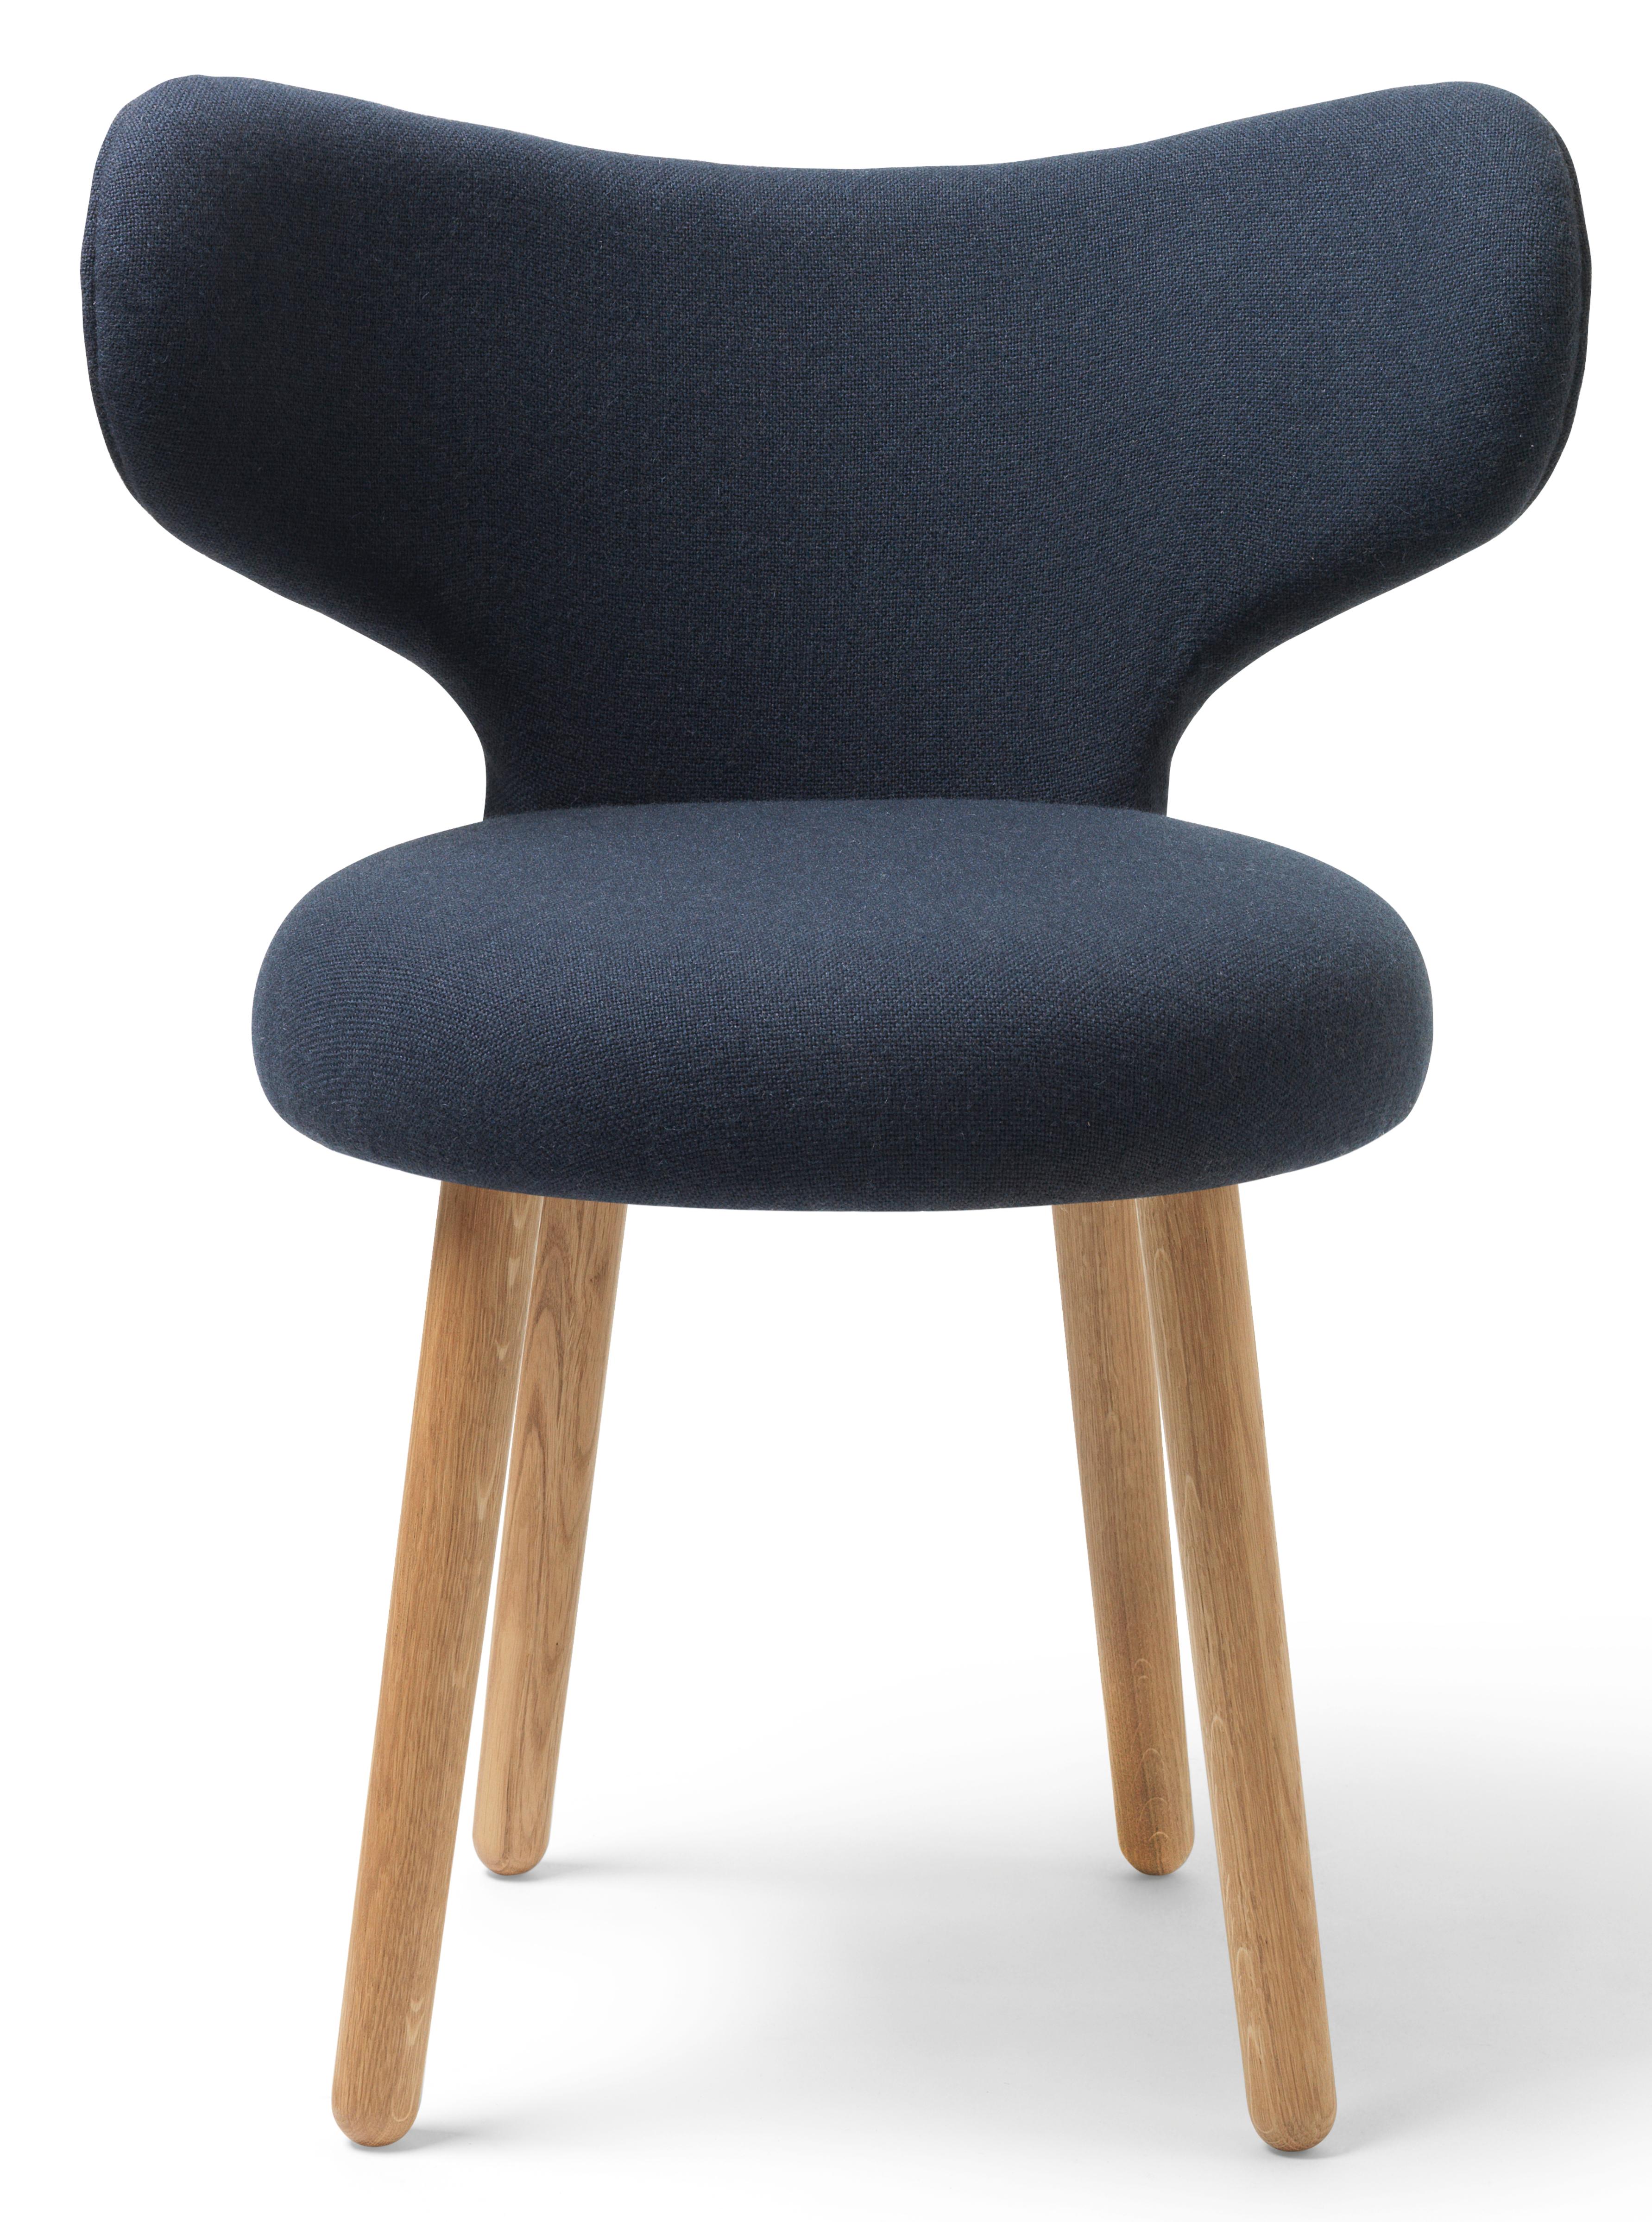 Other Set Of 2 KVADRAT/Hallingdal & Fiord WNG Chairs by Mazo Design